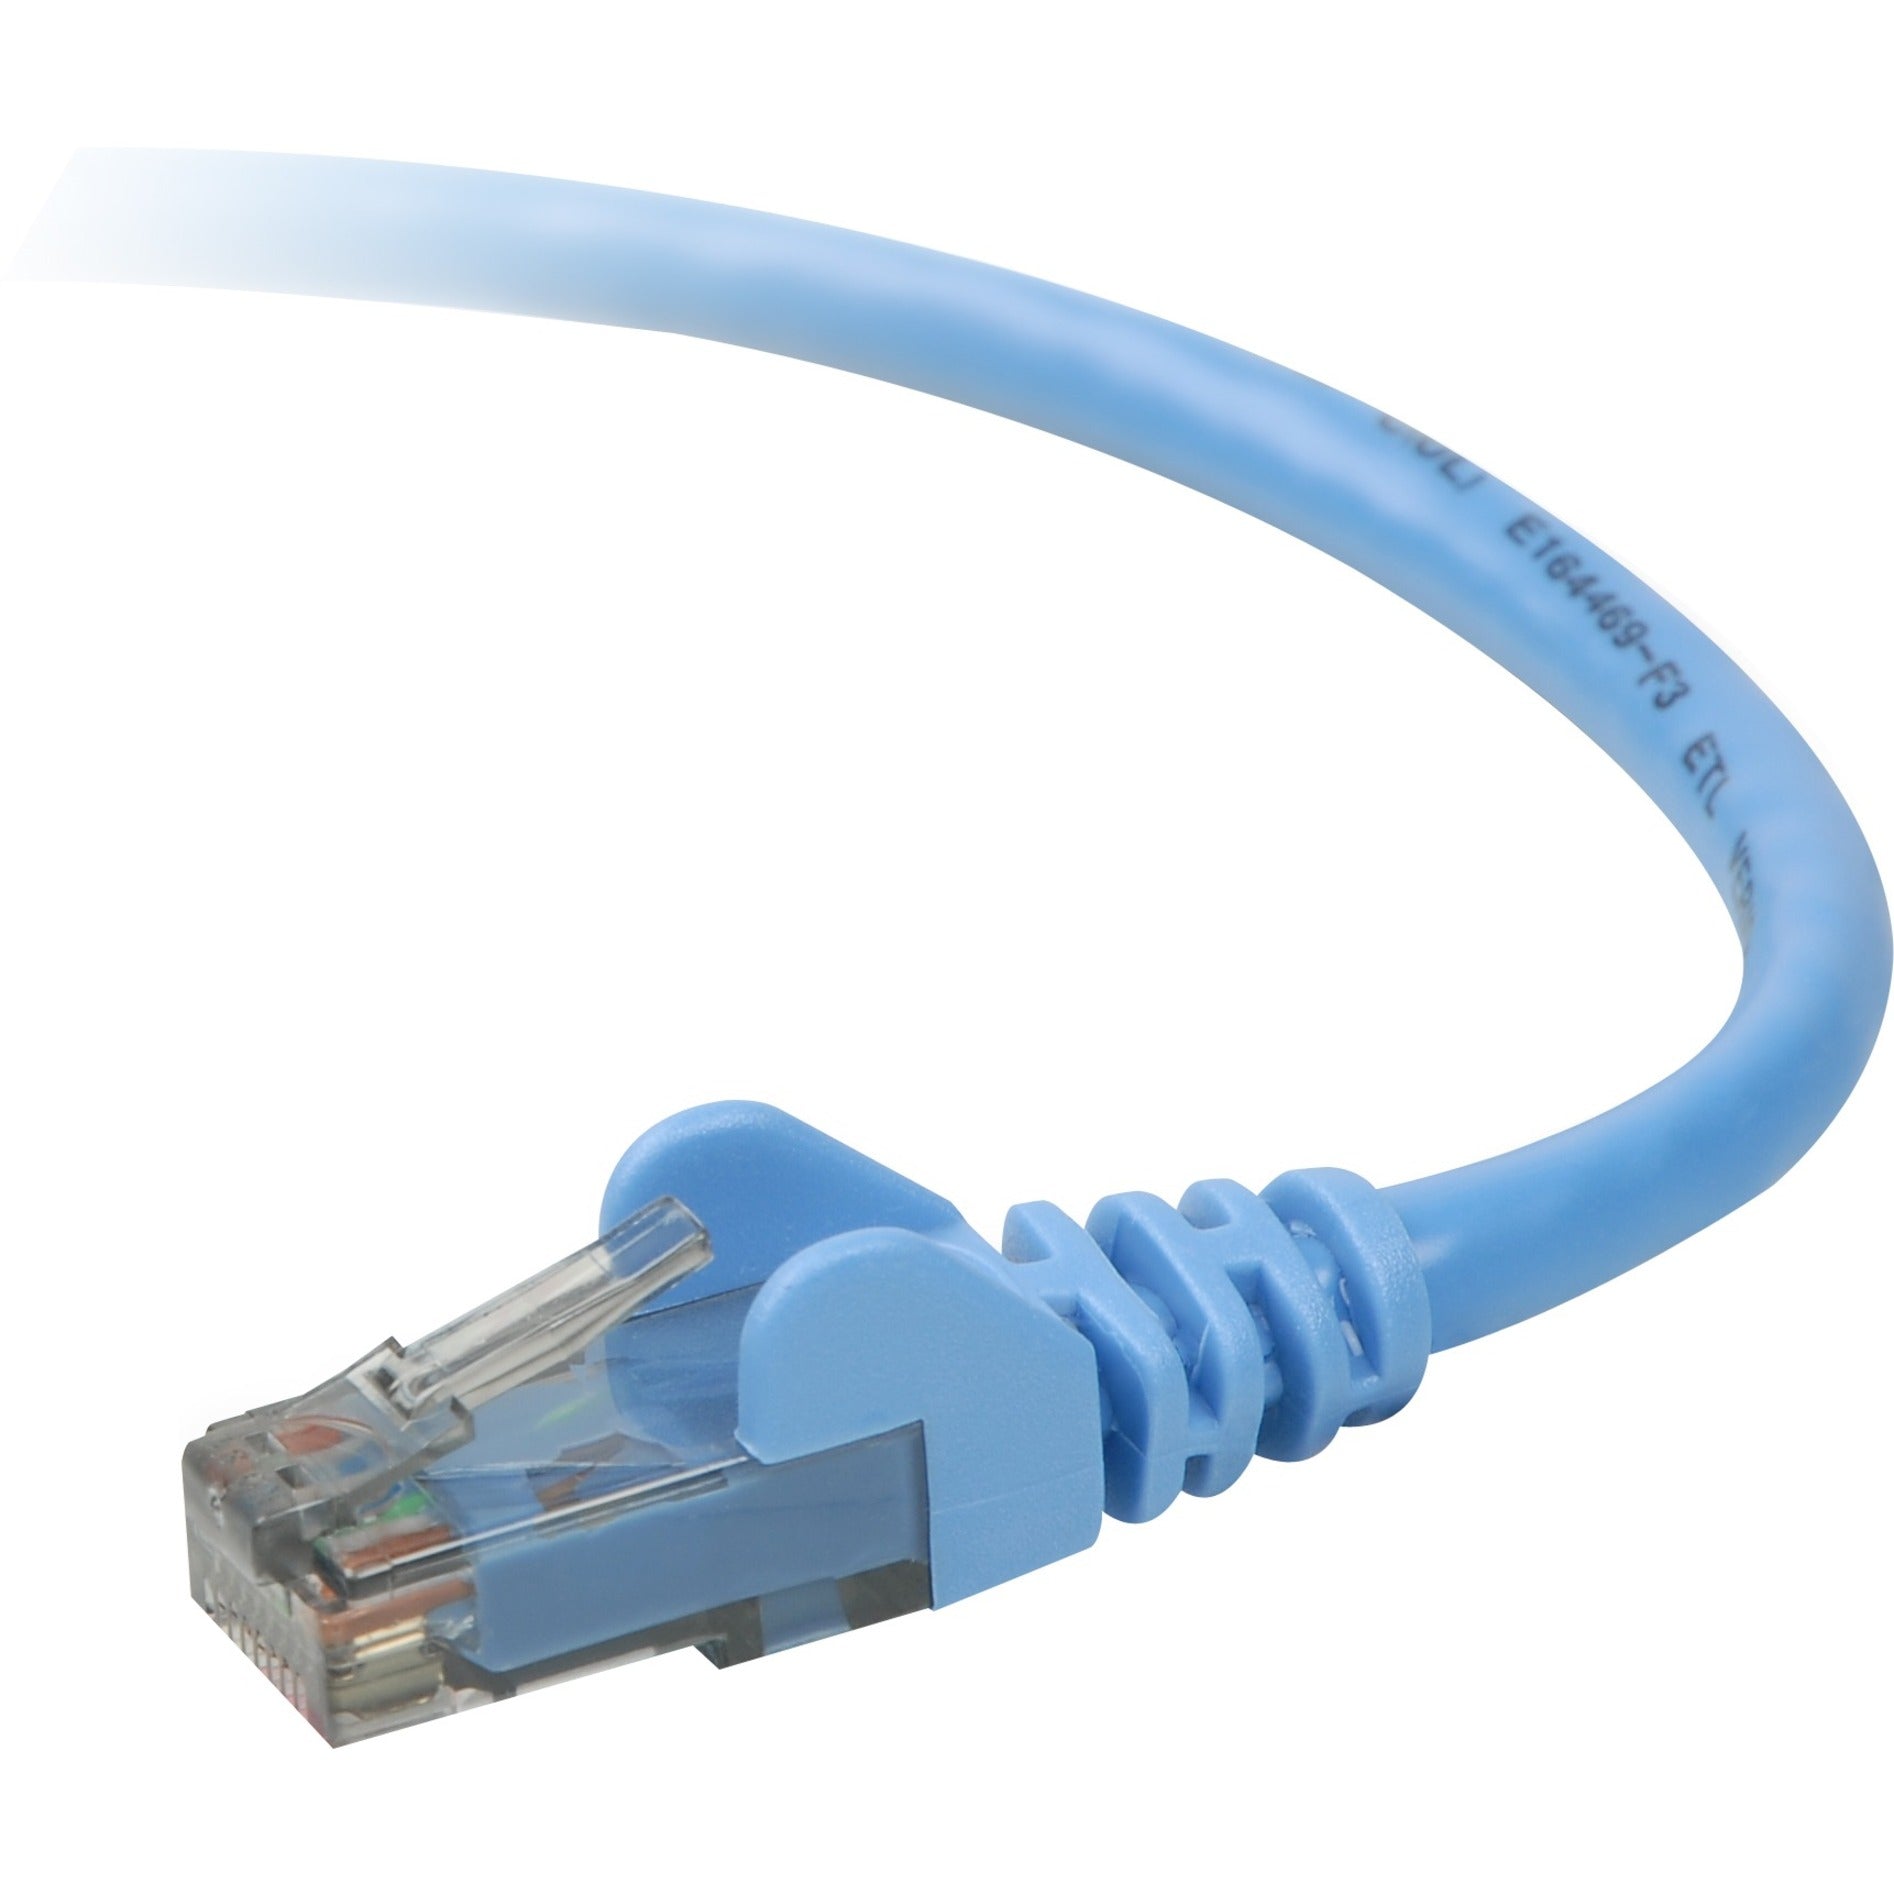 Belkin A3L980-15-BLU Cat.6 UTP Patch Network Cable, 15 ft, Copper Conductor, Gold Plated Connectors, Blue